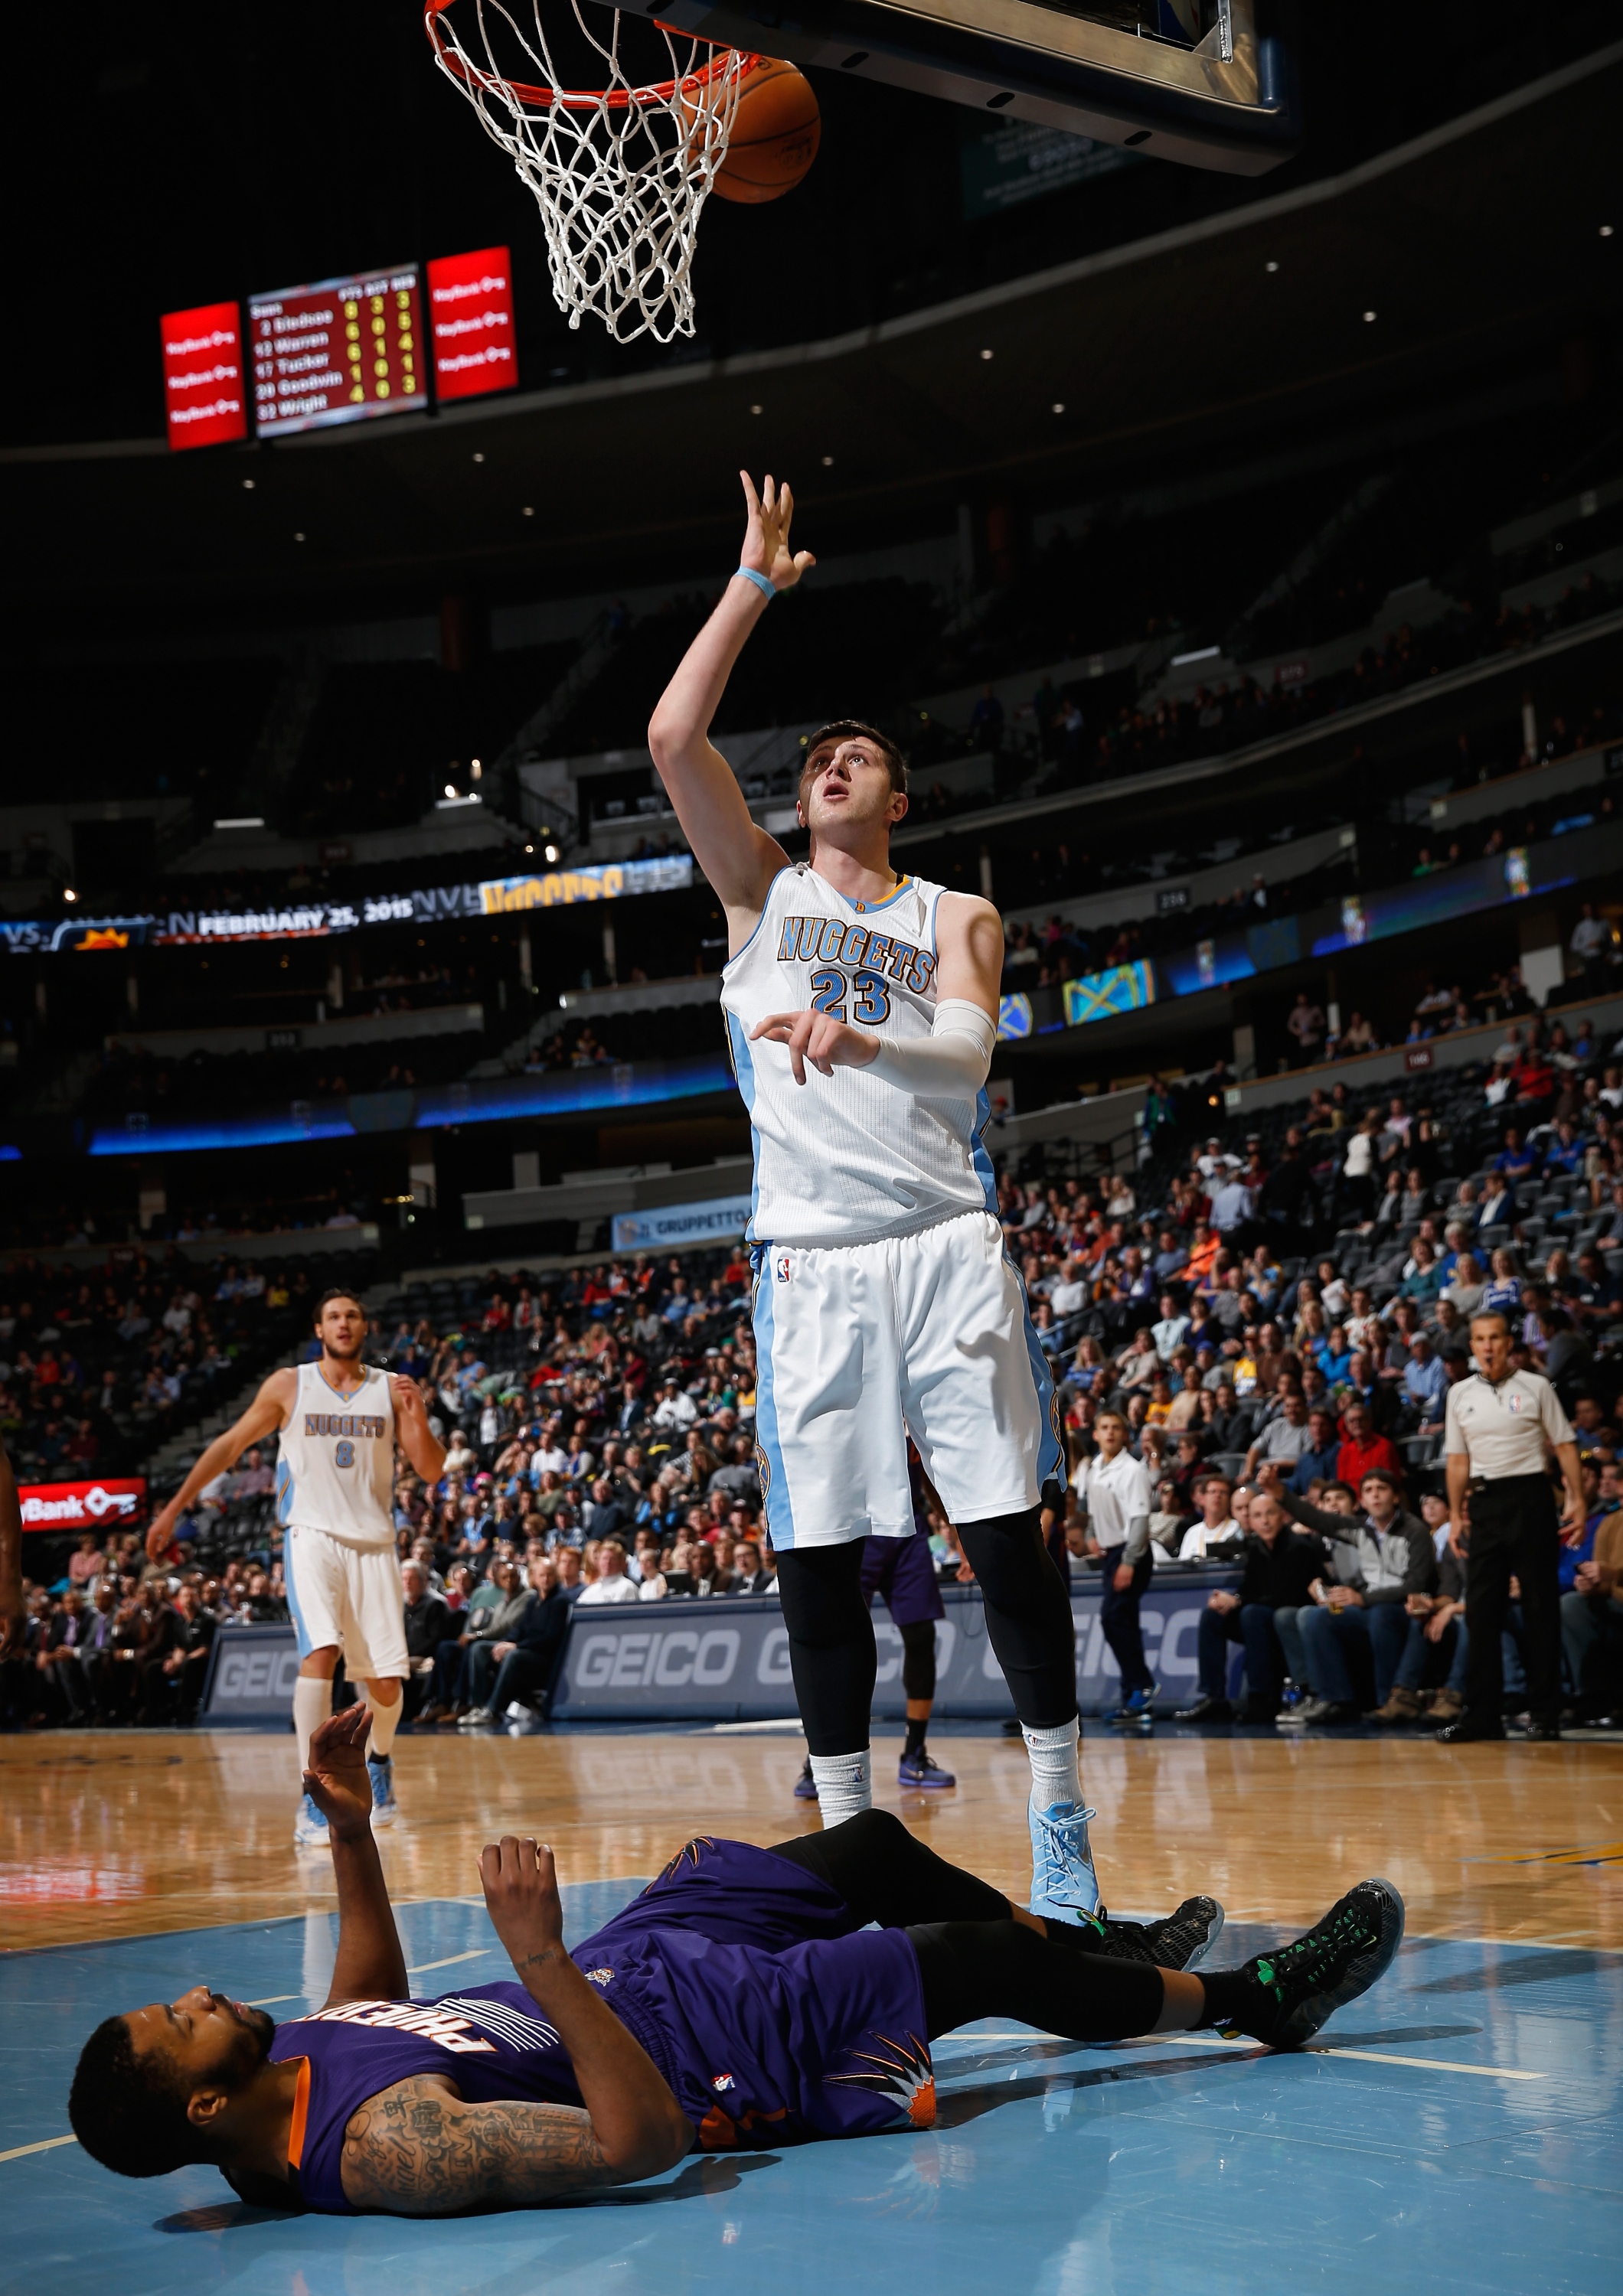 Jusuf Nurkic hits a layup after depositing Markieff Morris on the deck. (Doug Pensinger/Getty Images)